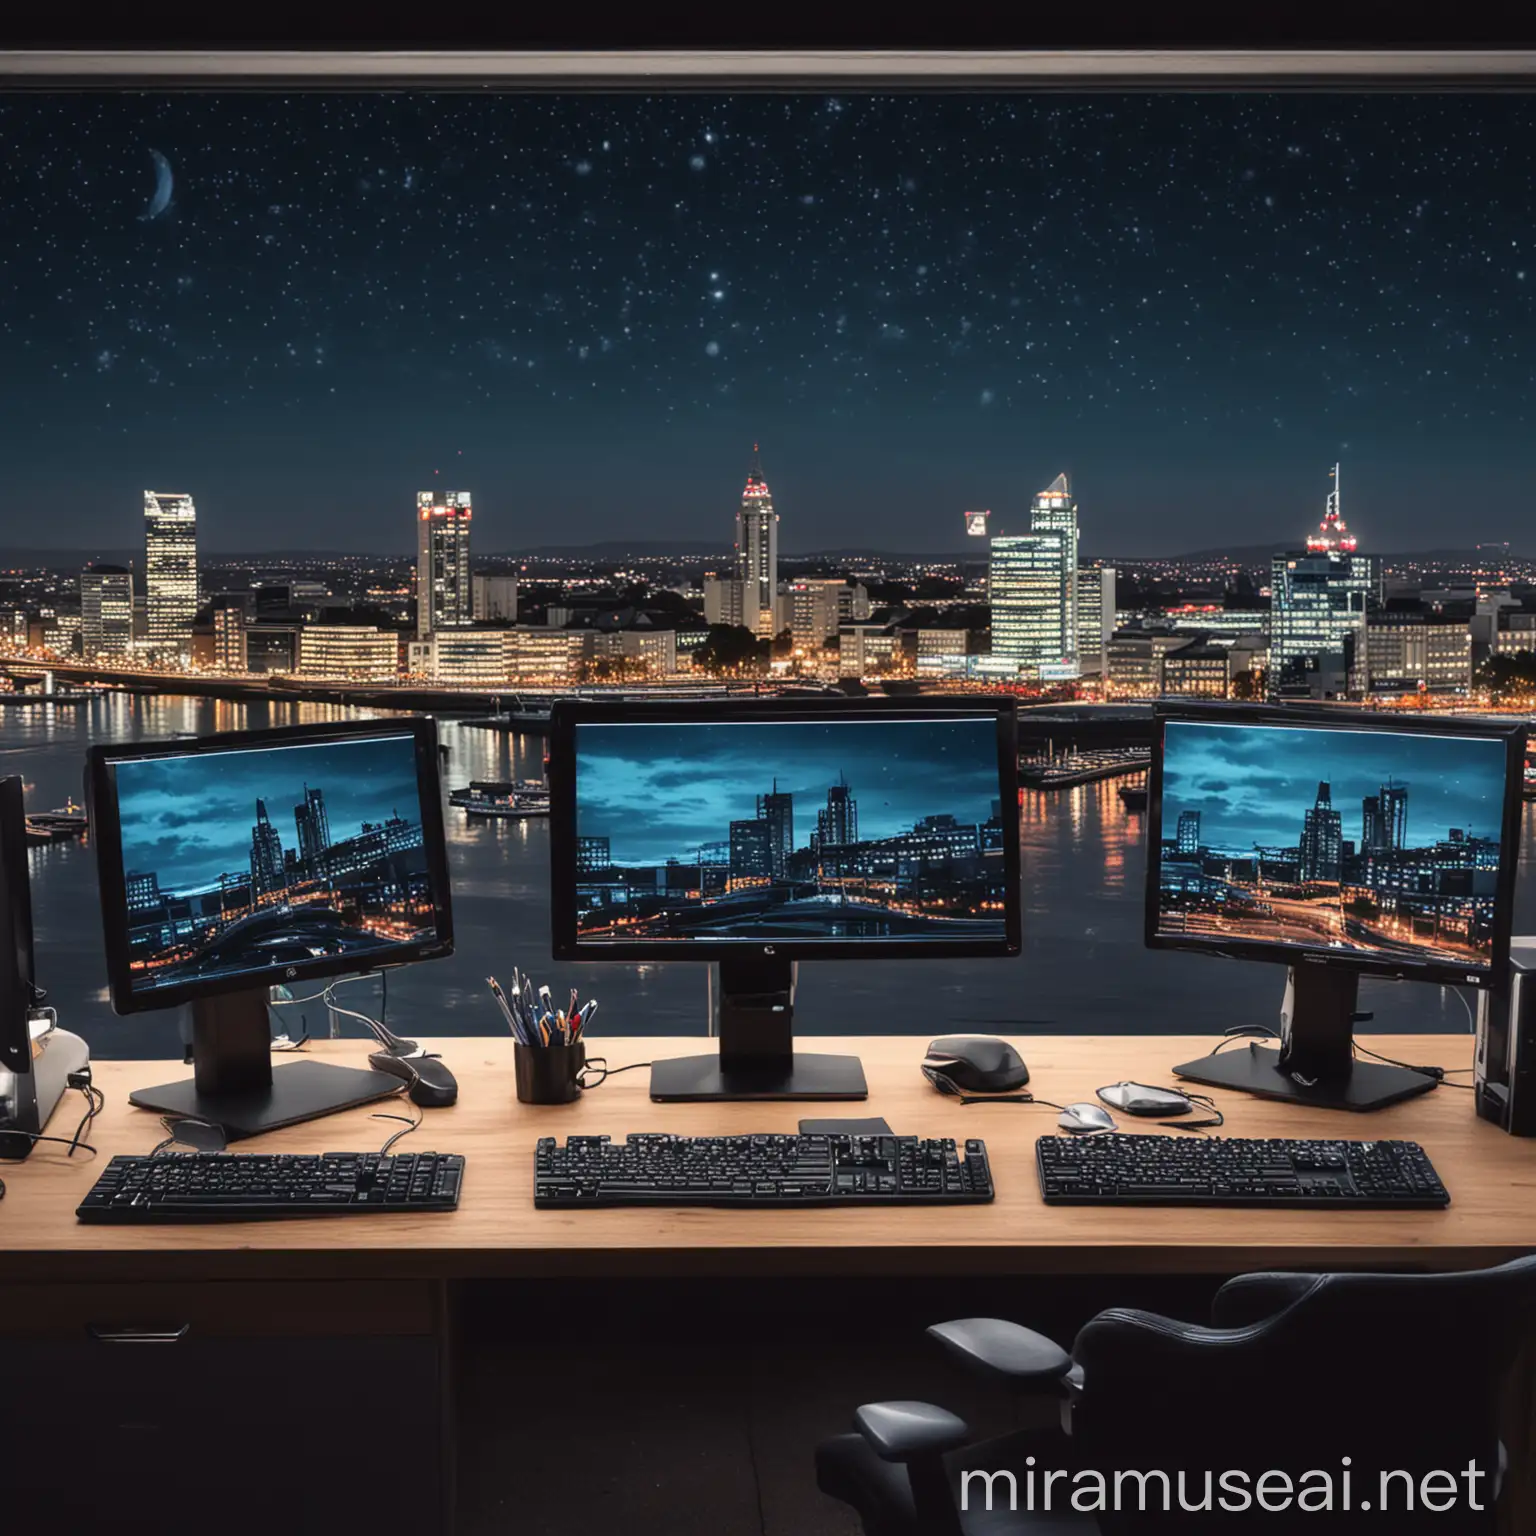 Cardiff Professional  news background with computers and nice clear  night view. Make everything spread out
